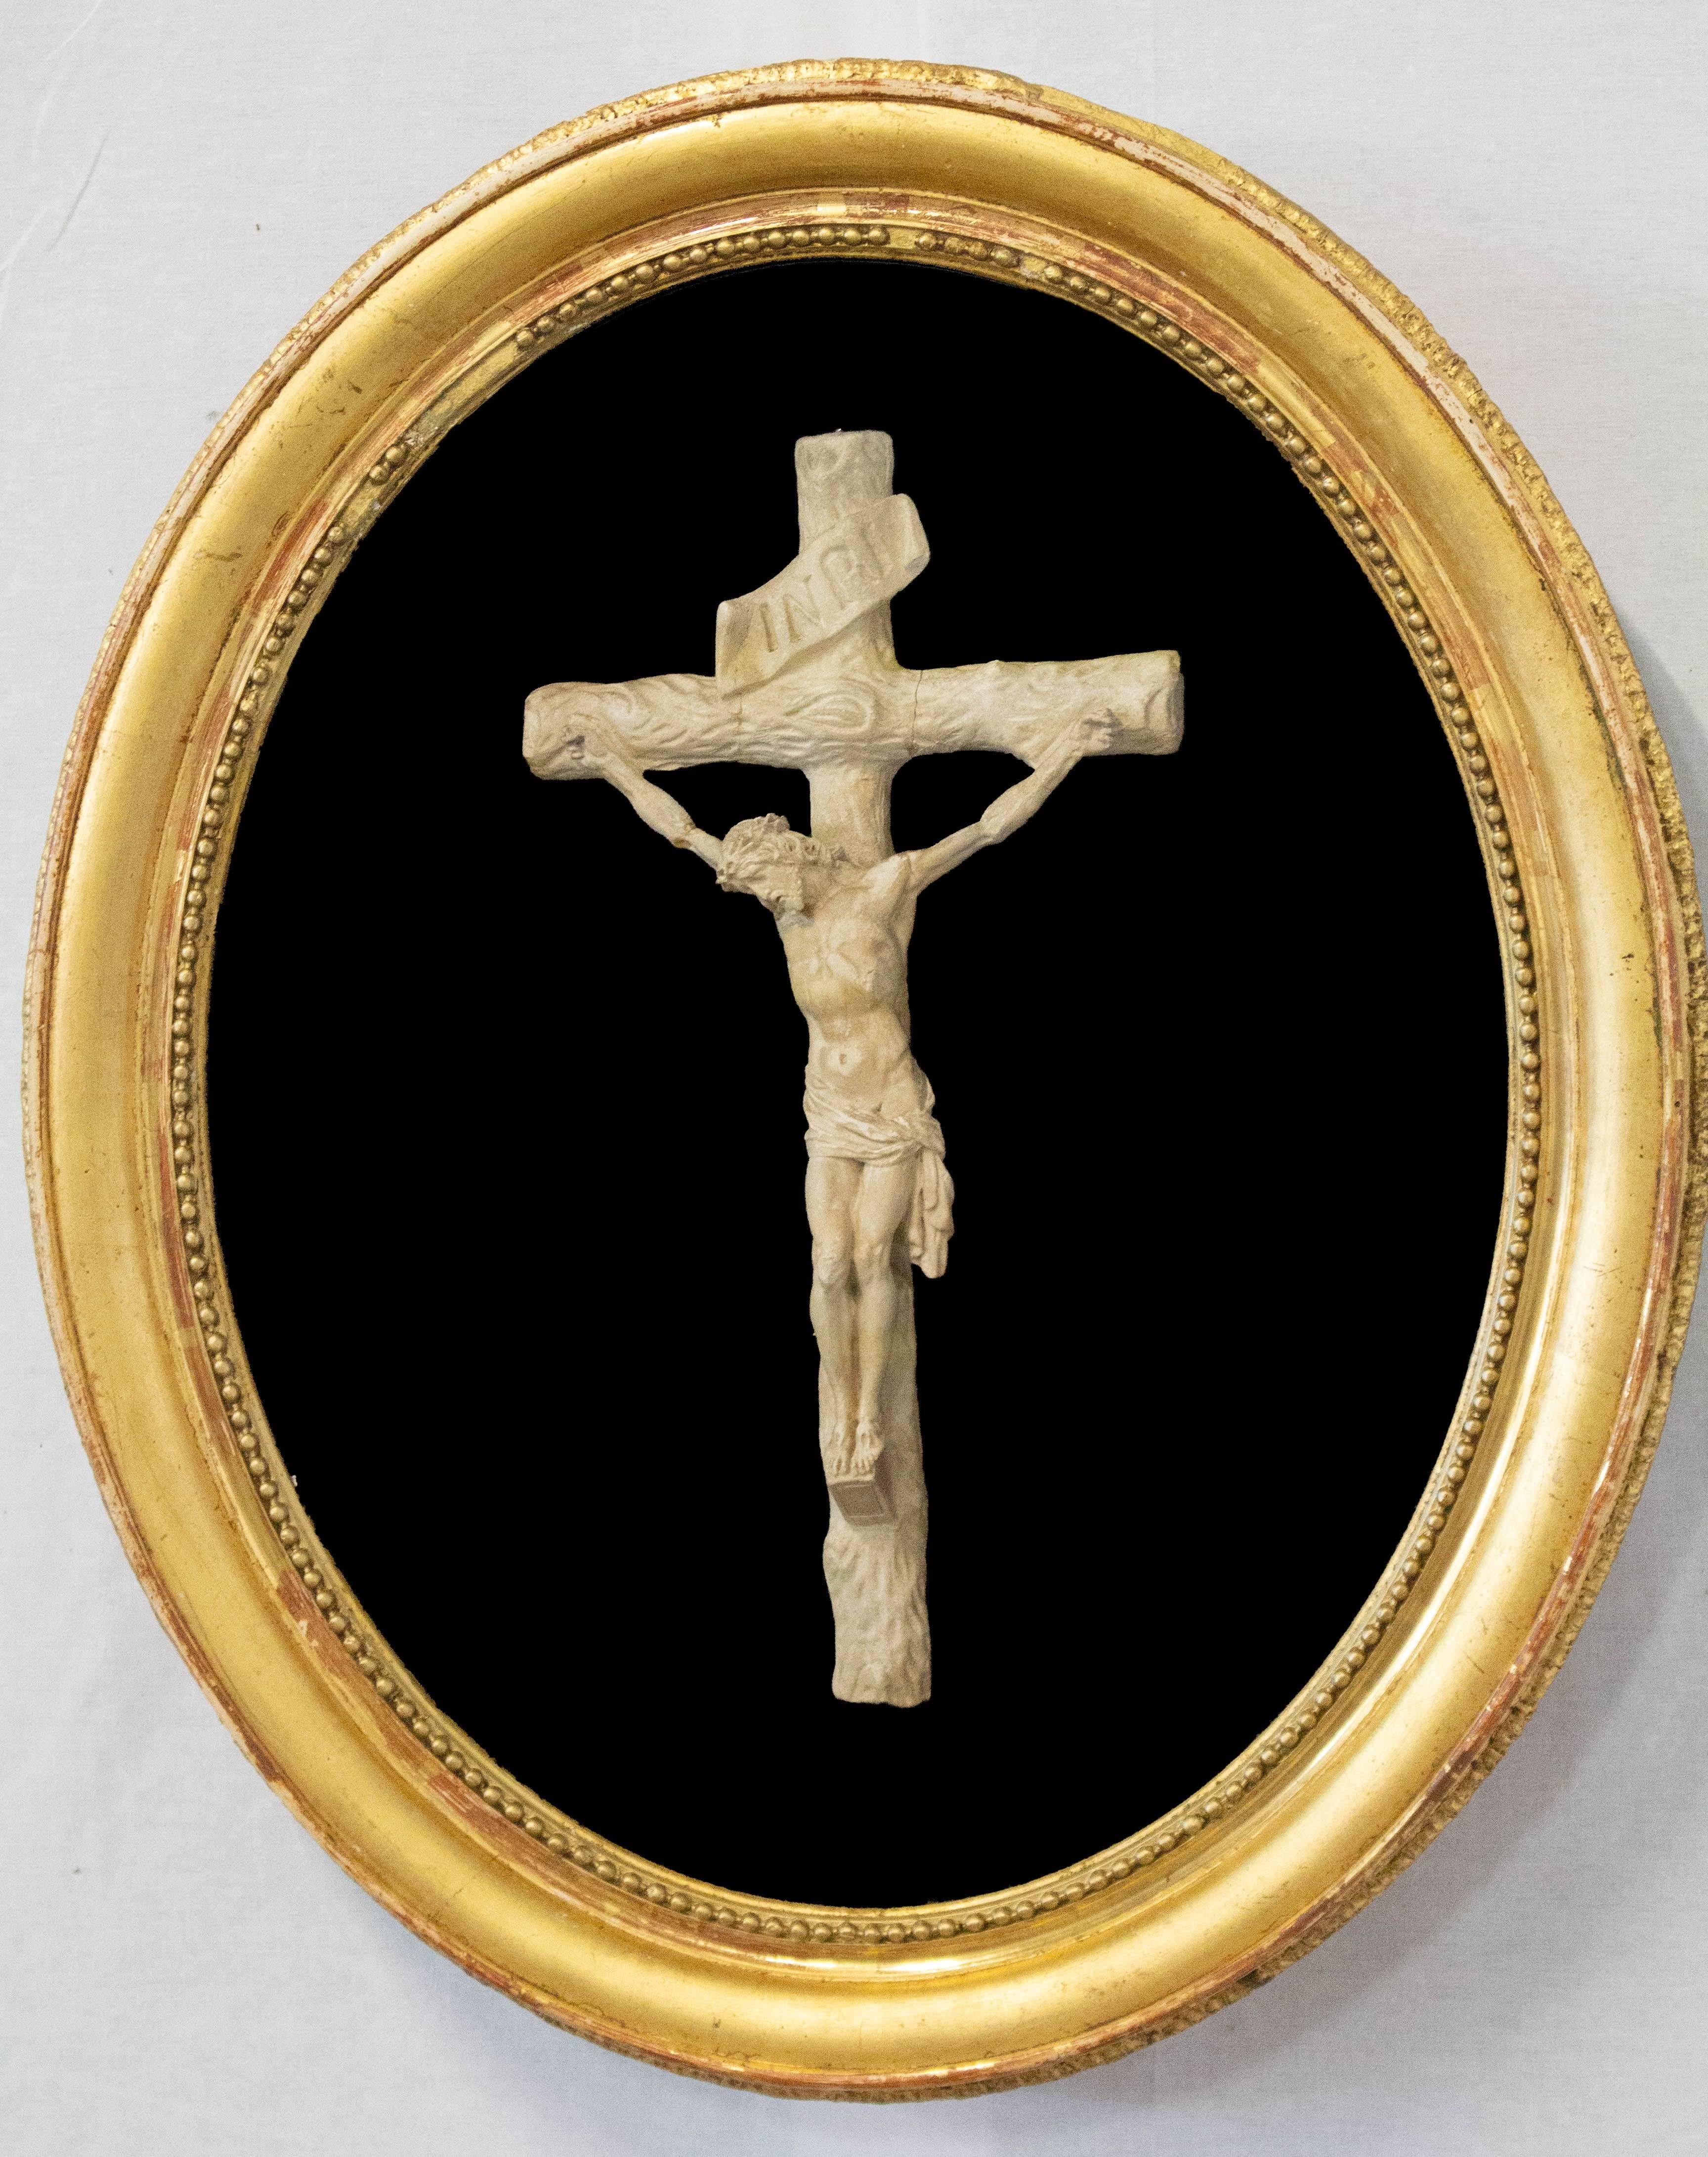 Crucifix in its oval vitrine, French, late 19th century
Golden frame
Good condition

For shipping: 9/51/60 cm, 3.3 kg.